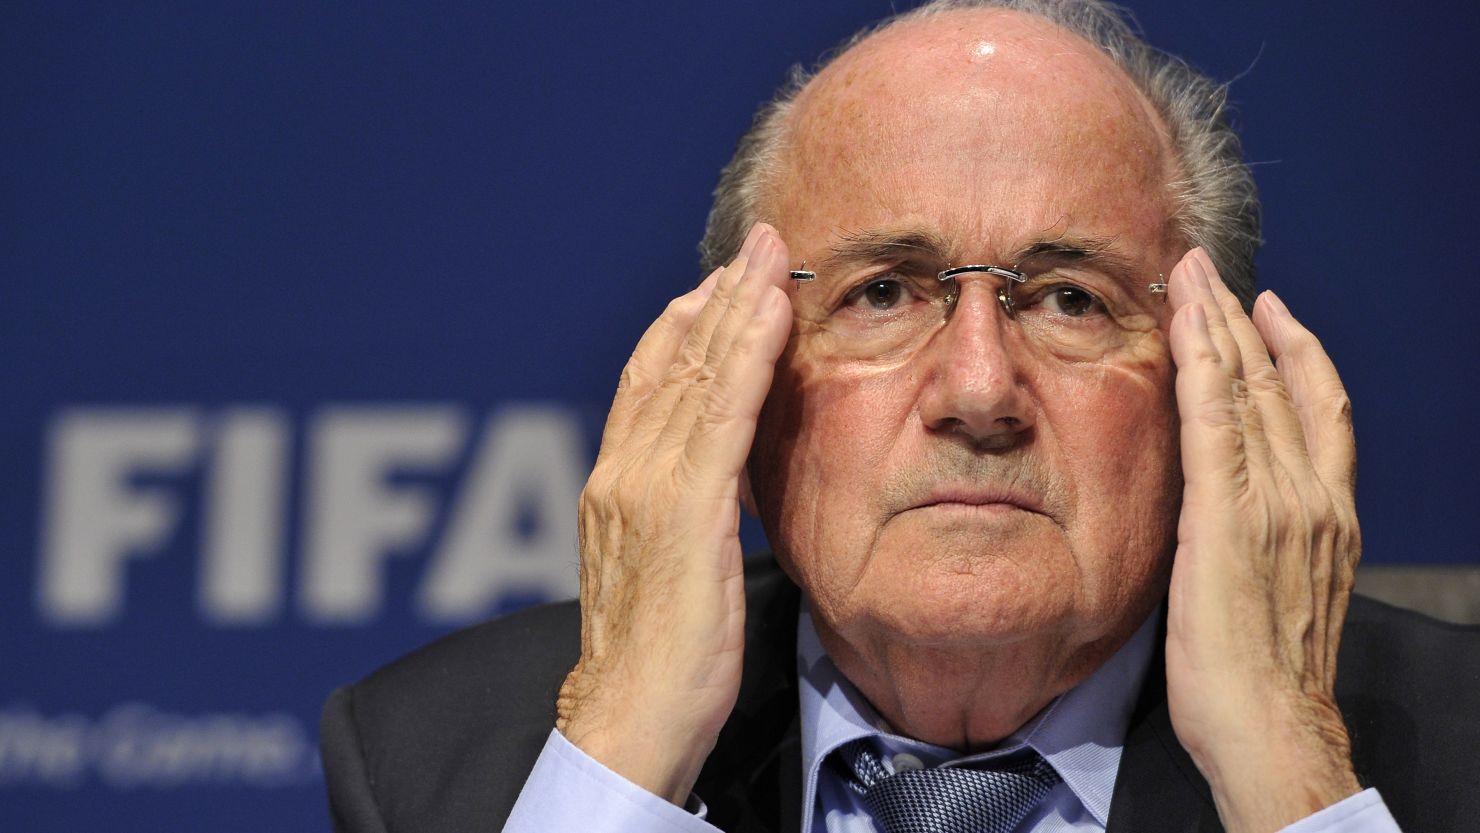 FIFA president Sepp Blatter has been the victim of hacking after his Twitter account was hijacked